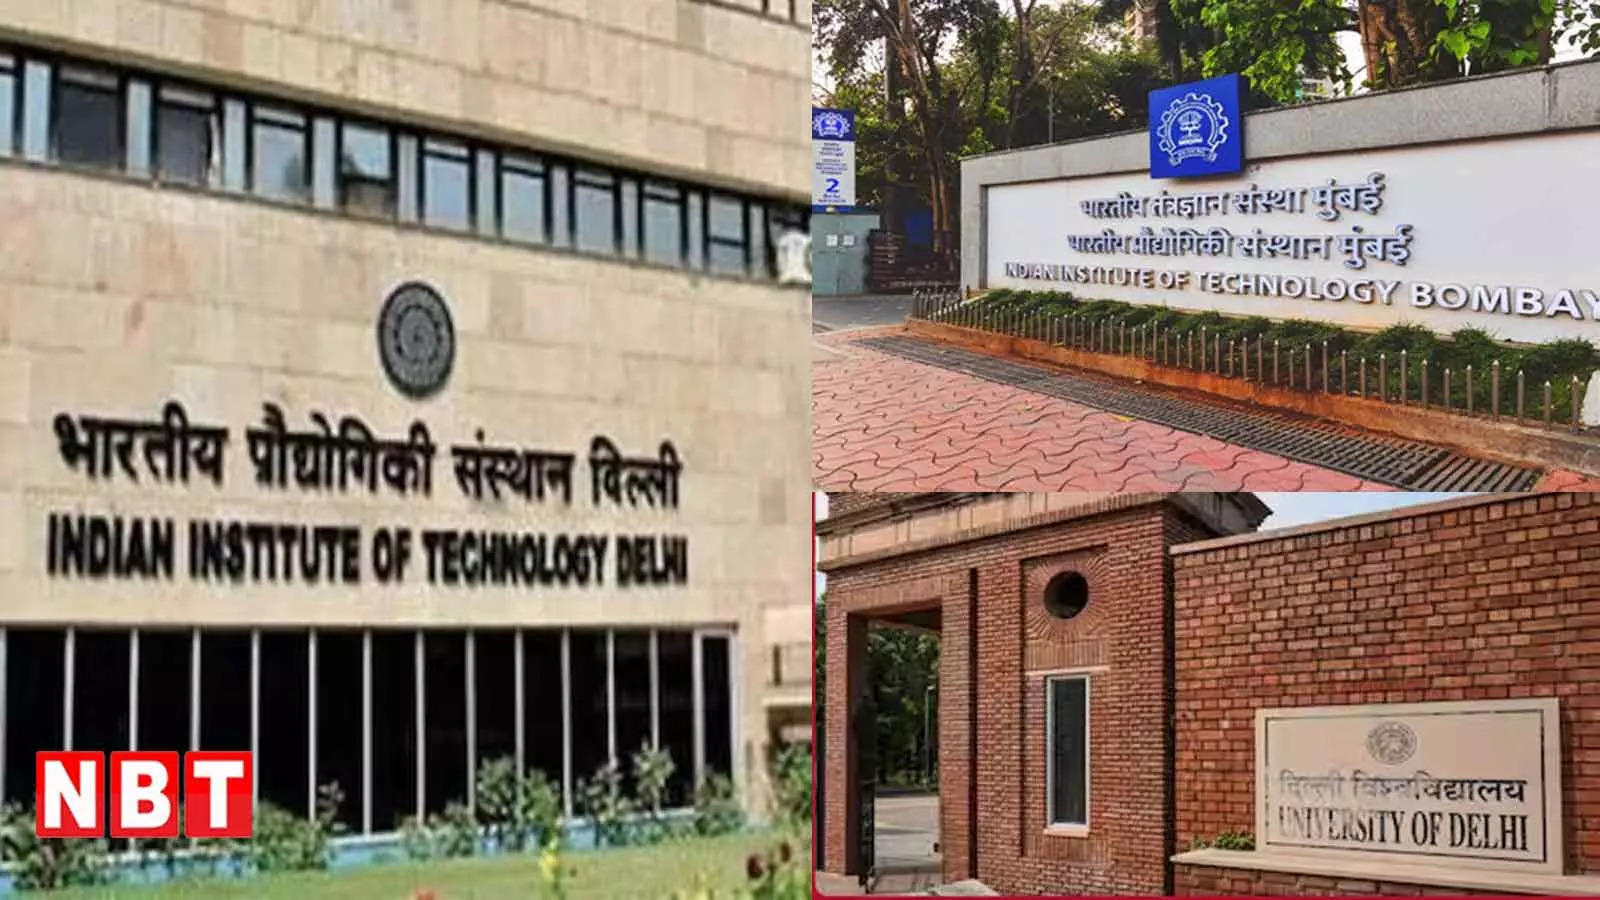 World University Ranking 2025 released, IIT-Delhi ranked 150th and Delhi University at what number